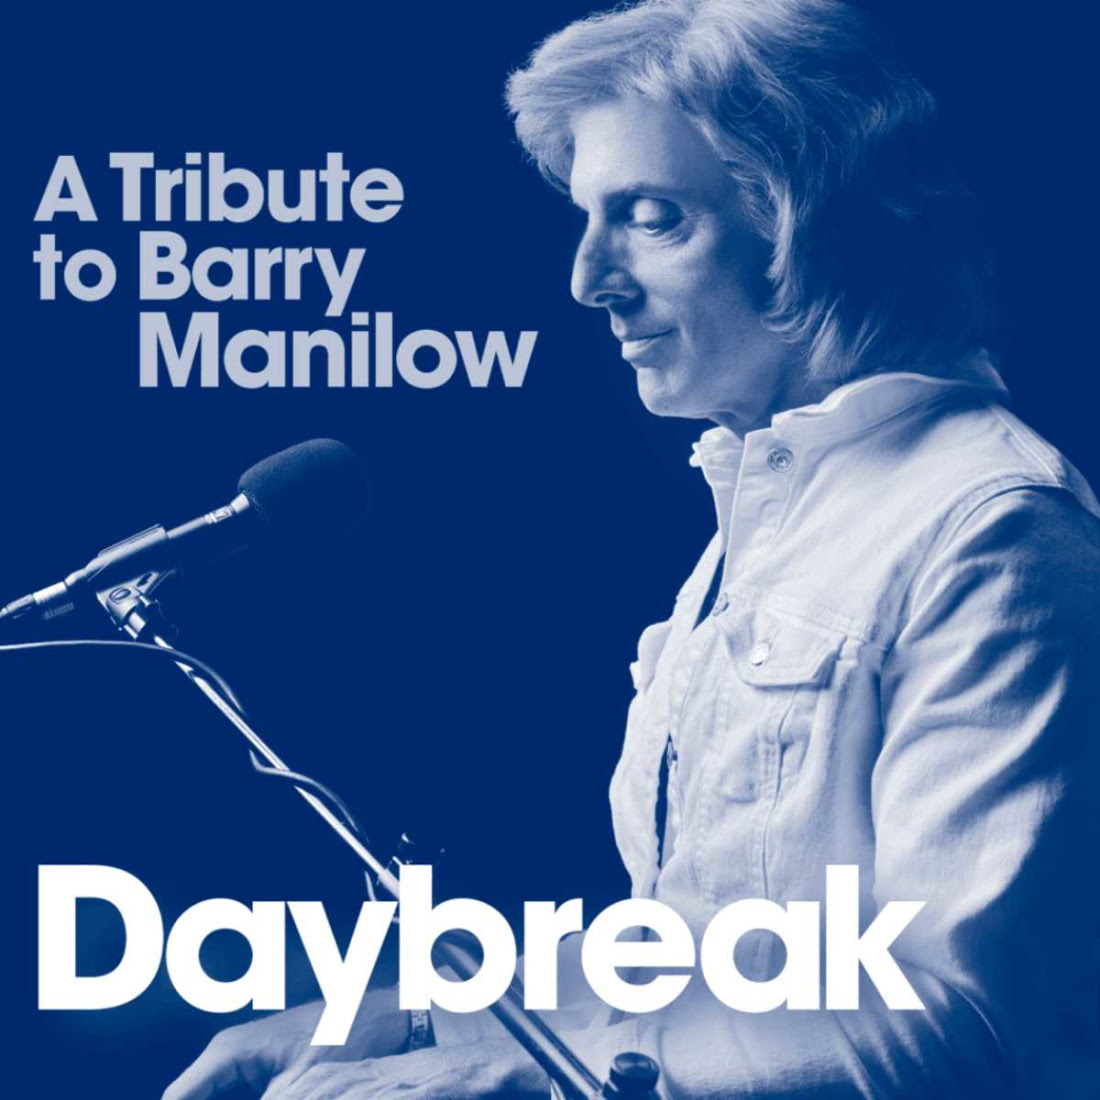 DAYBREAK: “The Music & Passion of Barry Manilow”